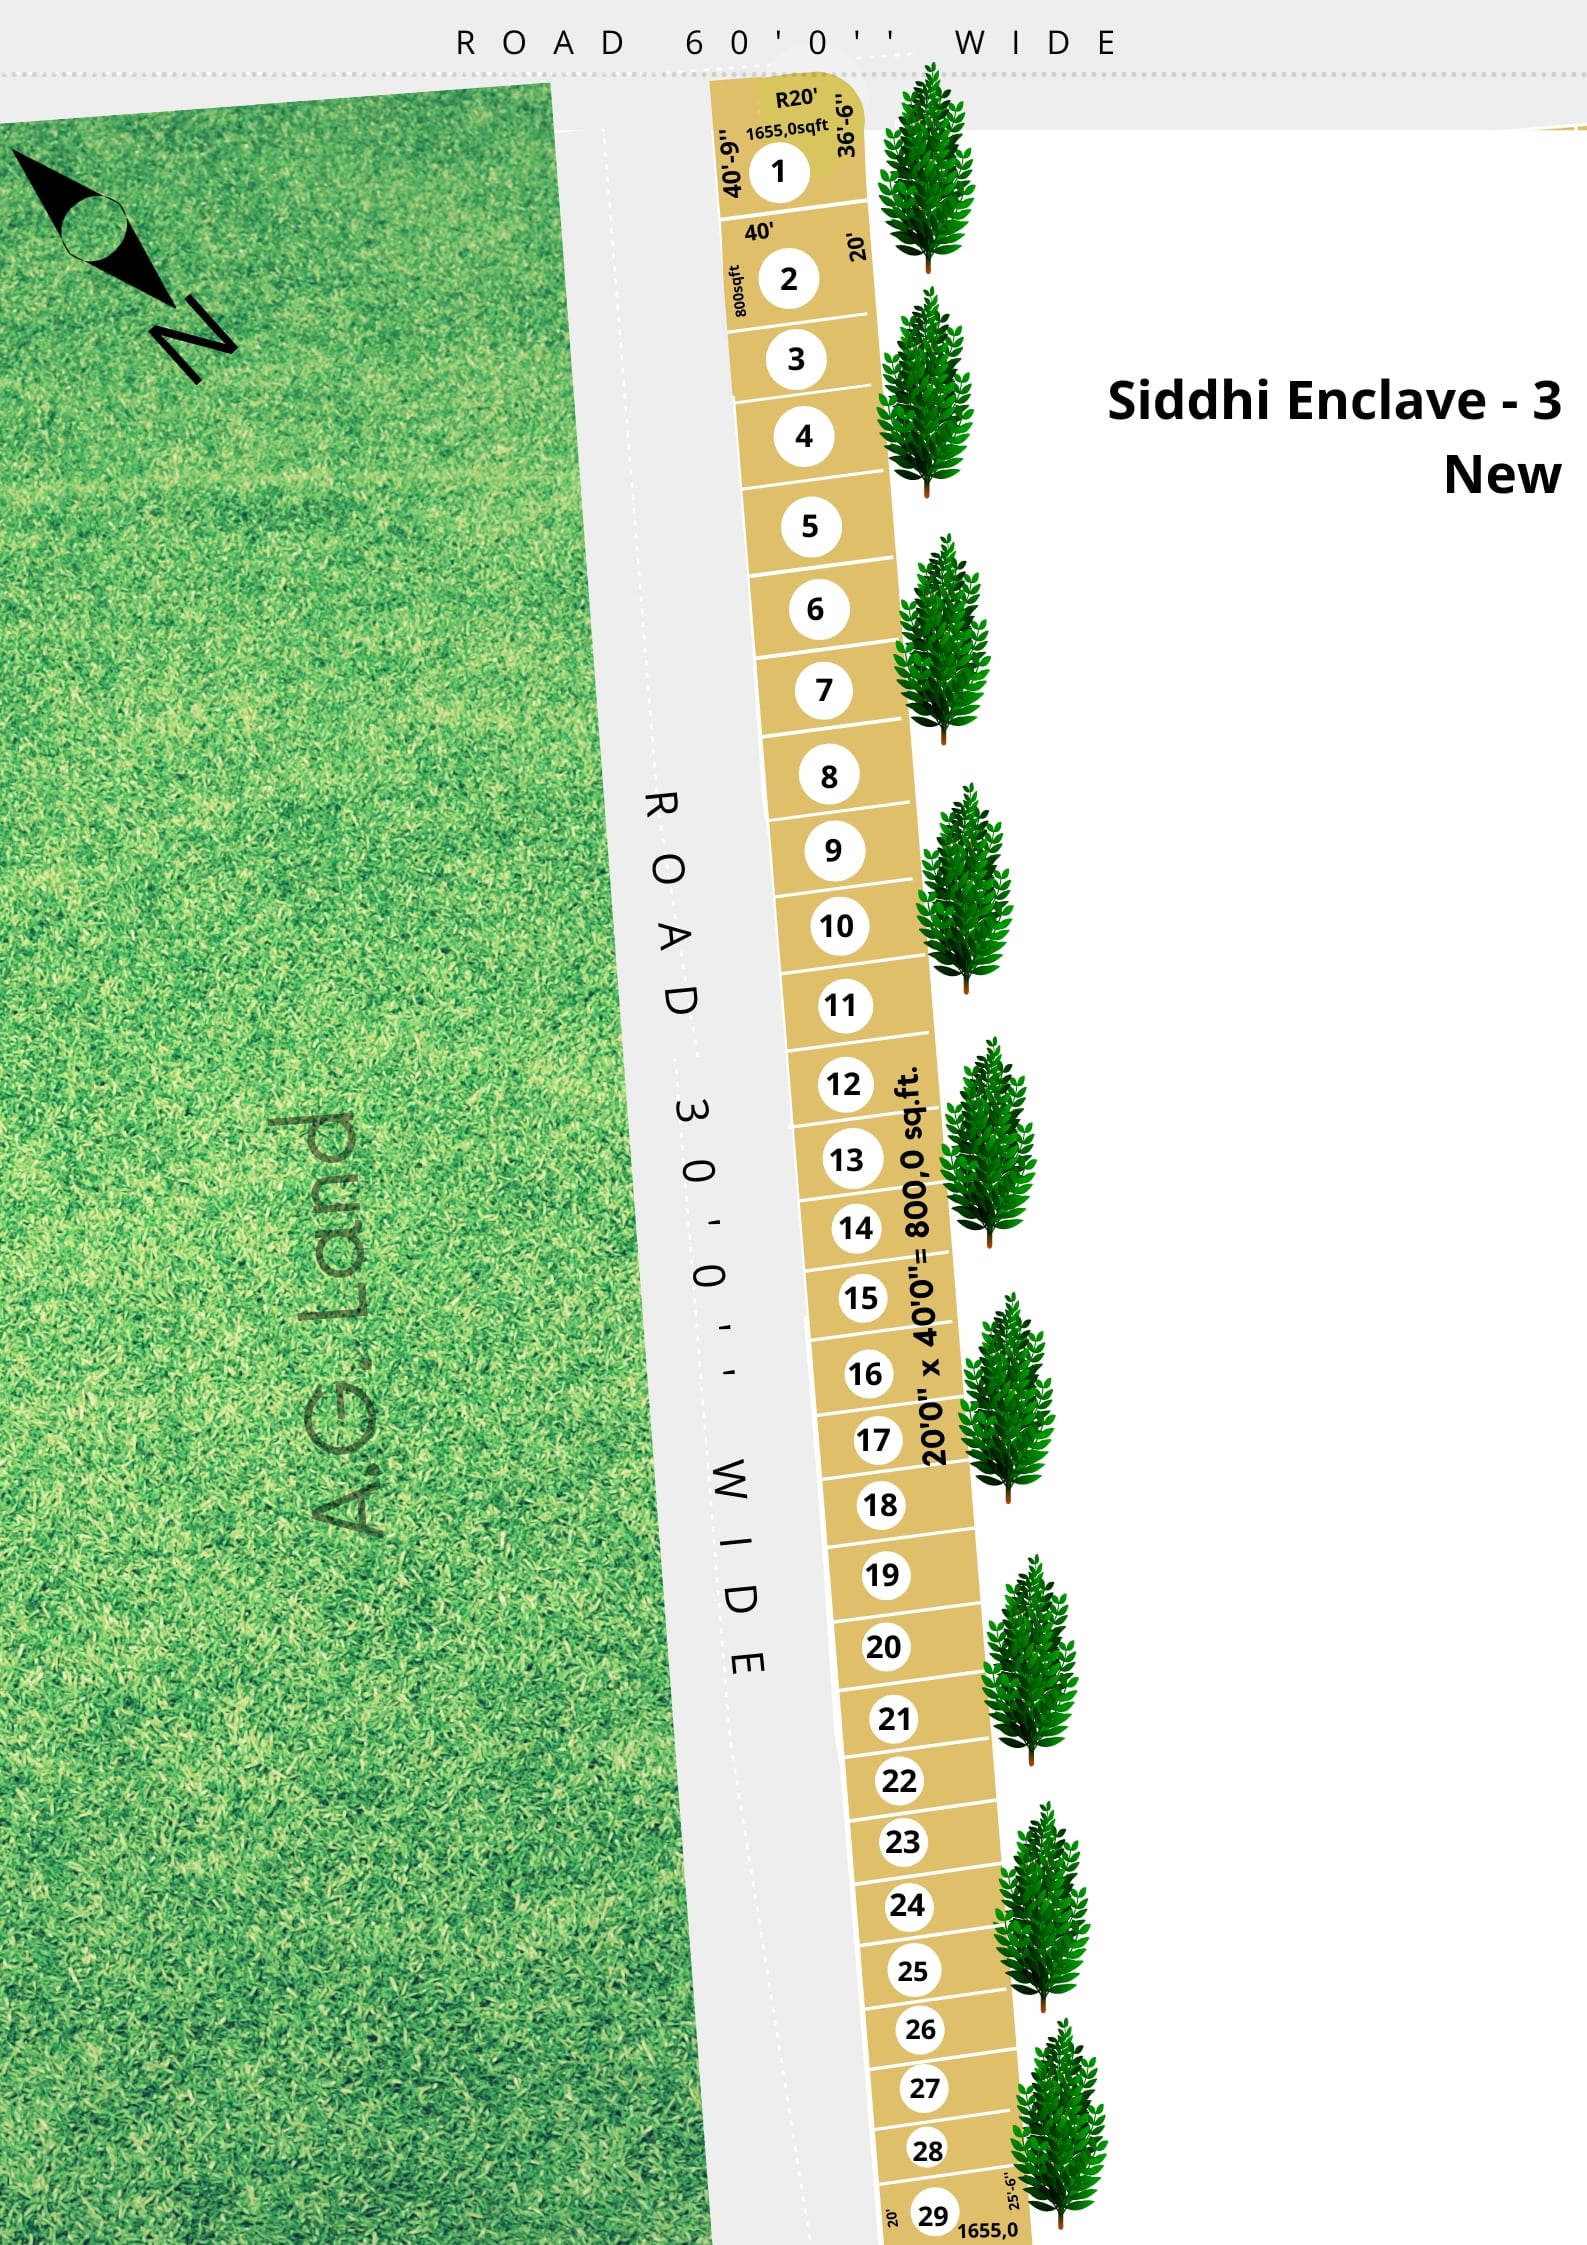 Siddhi Enclave - 3 New MAP